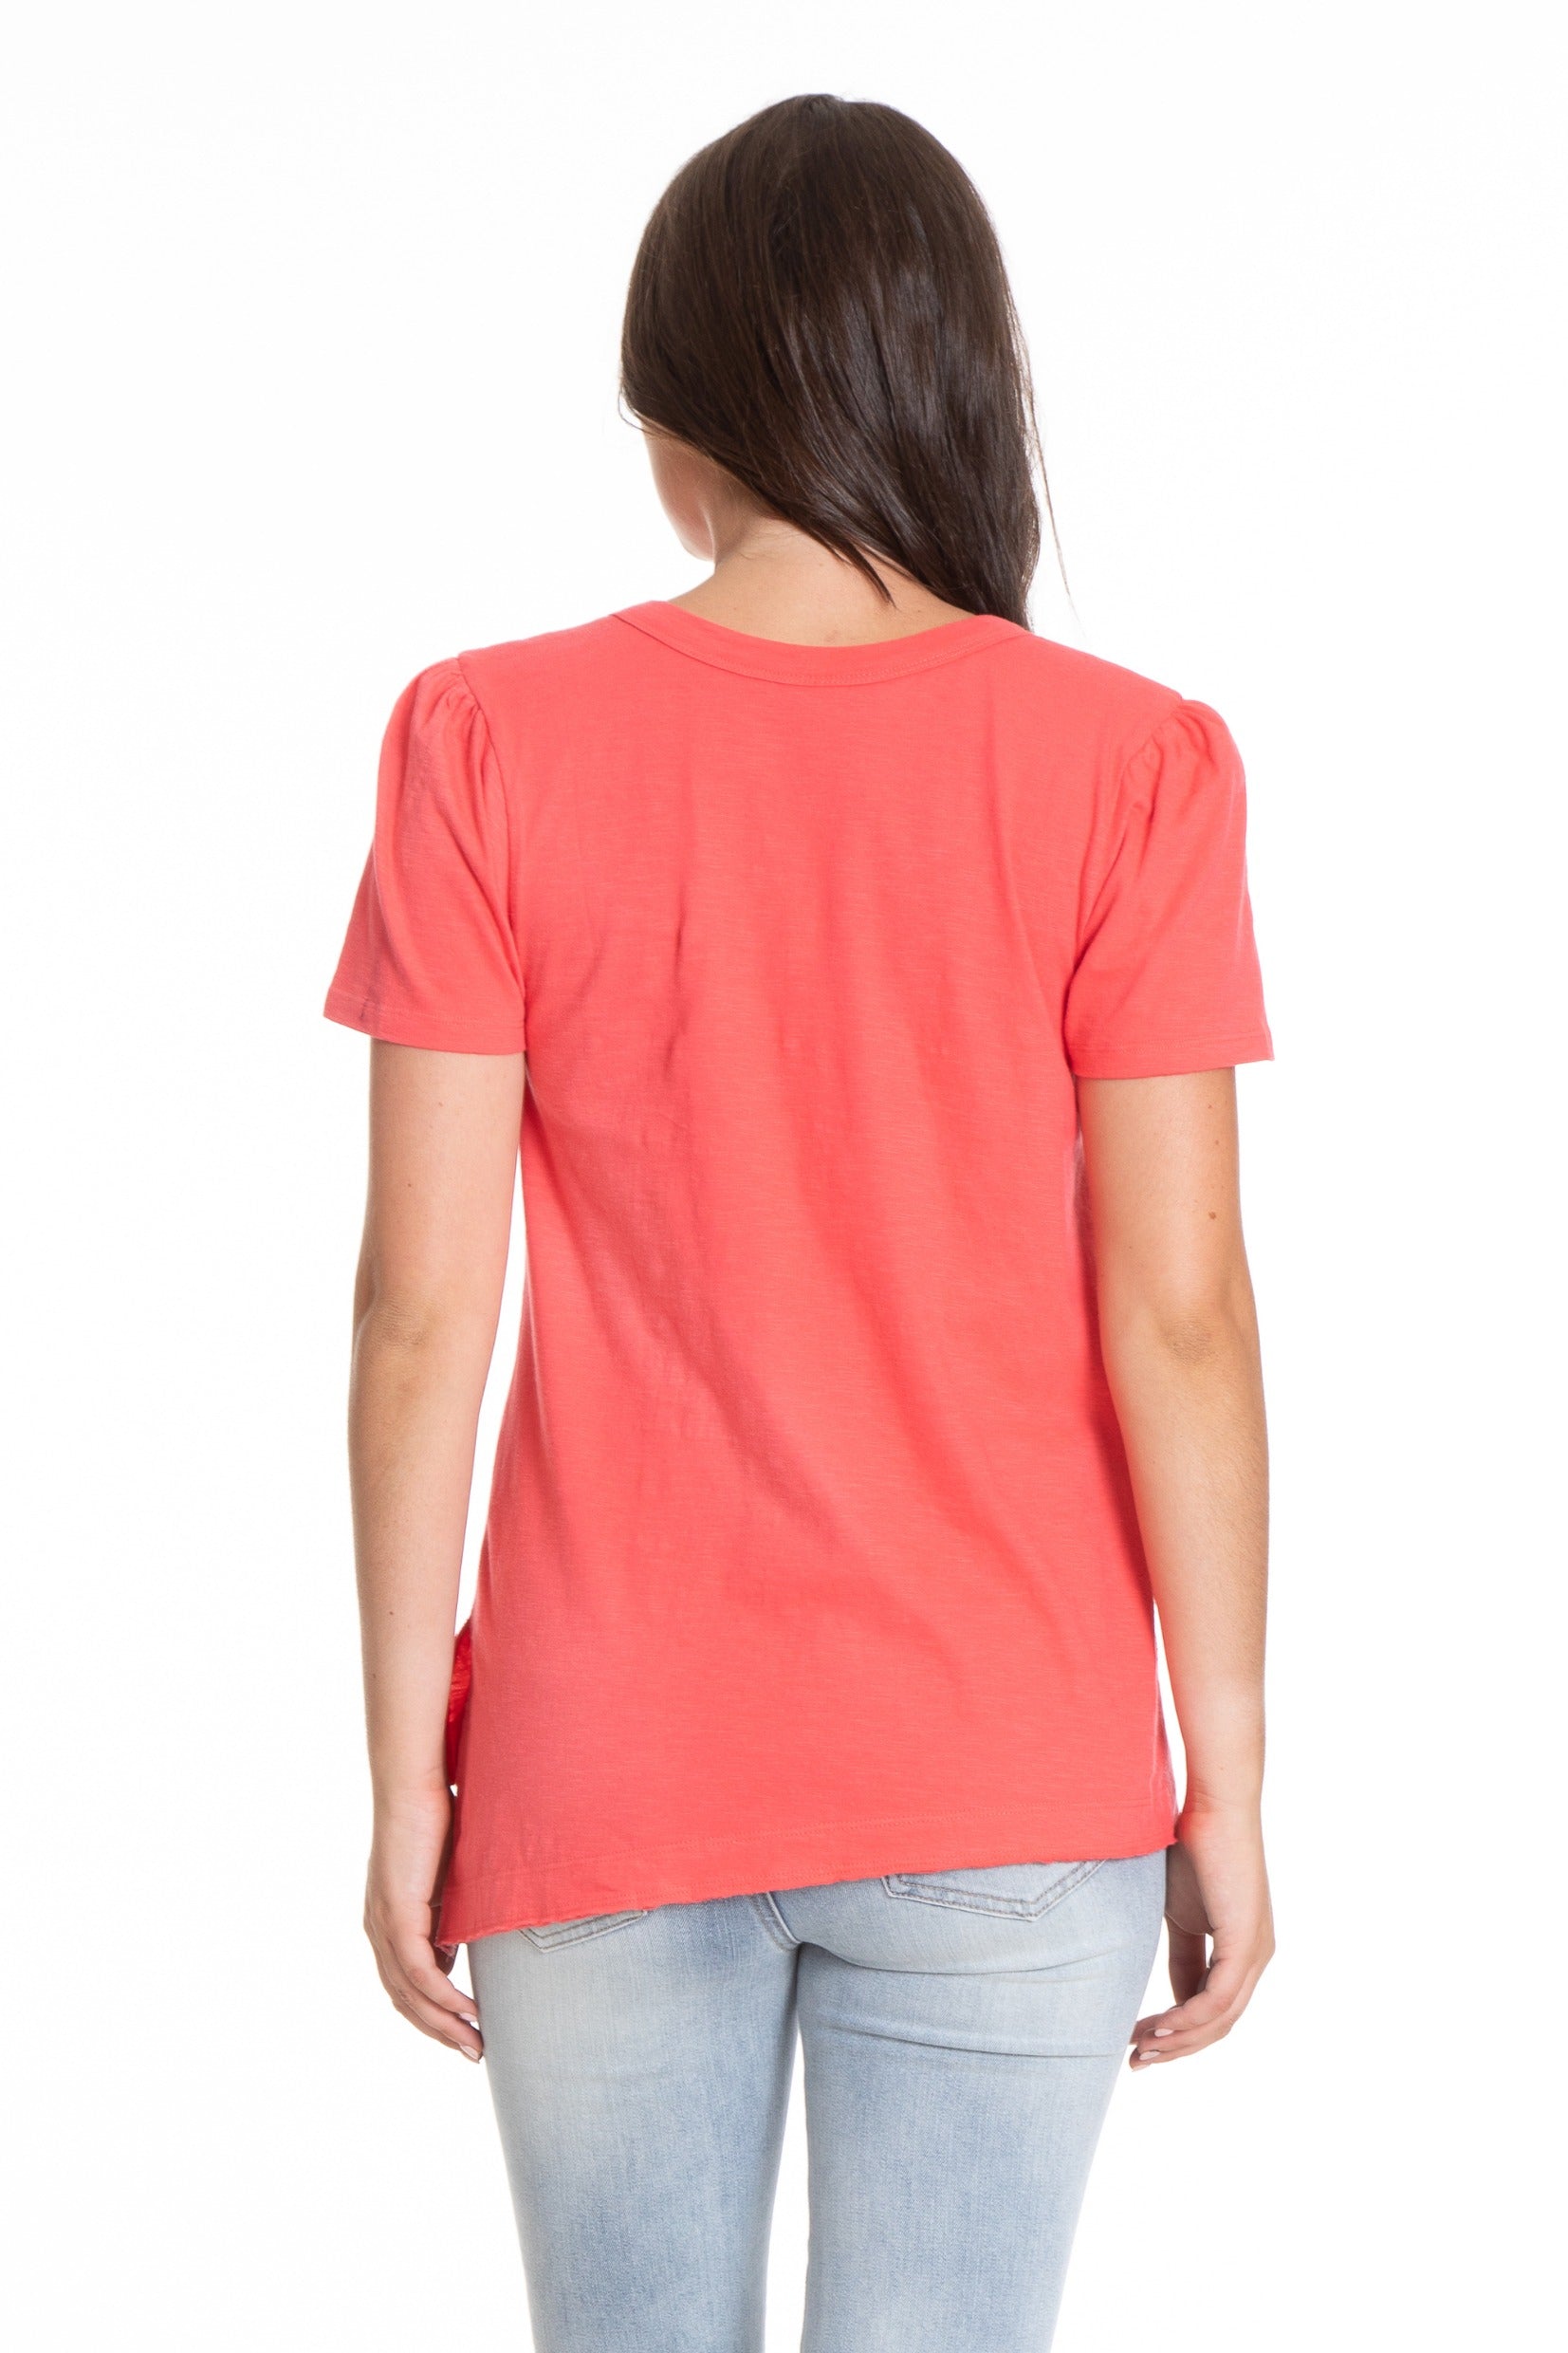 Ruched Sleeve Tee With Asym Hem coral back APNY